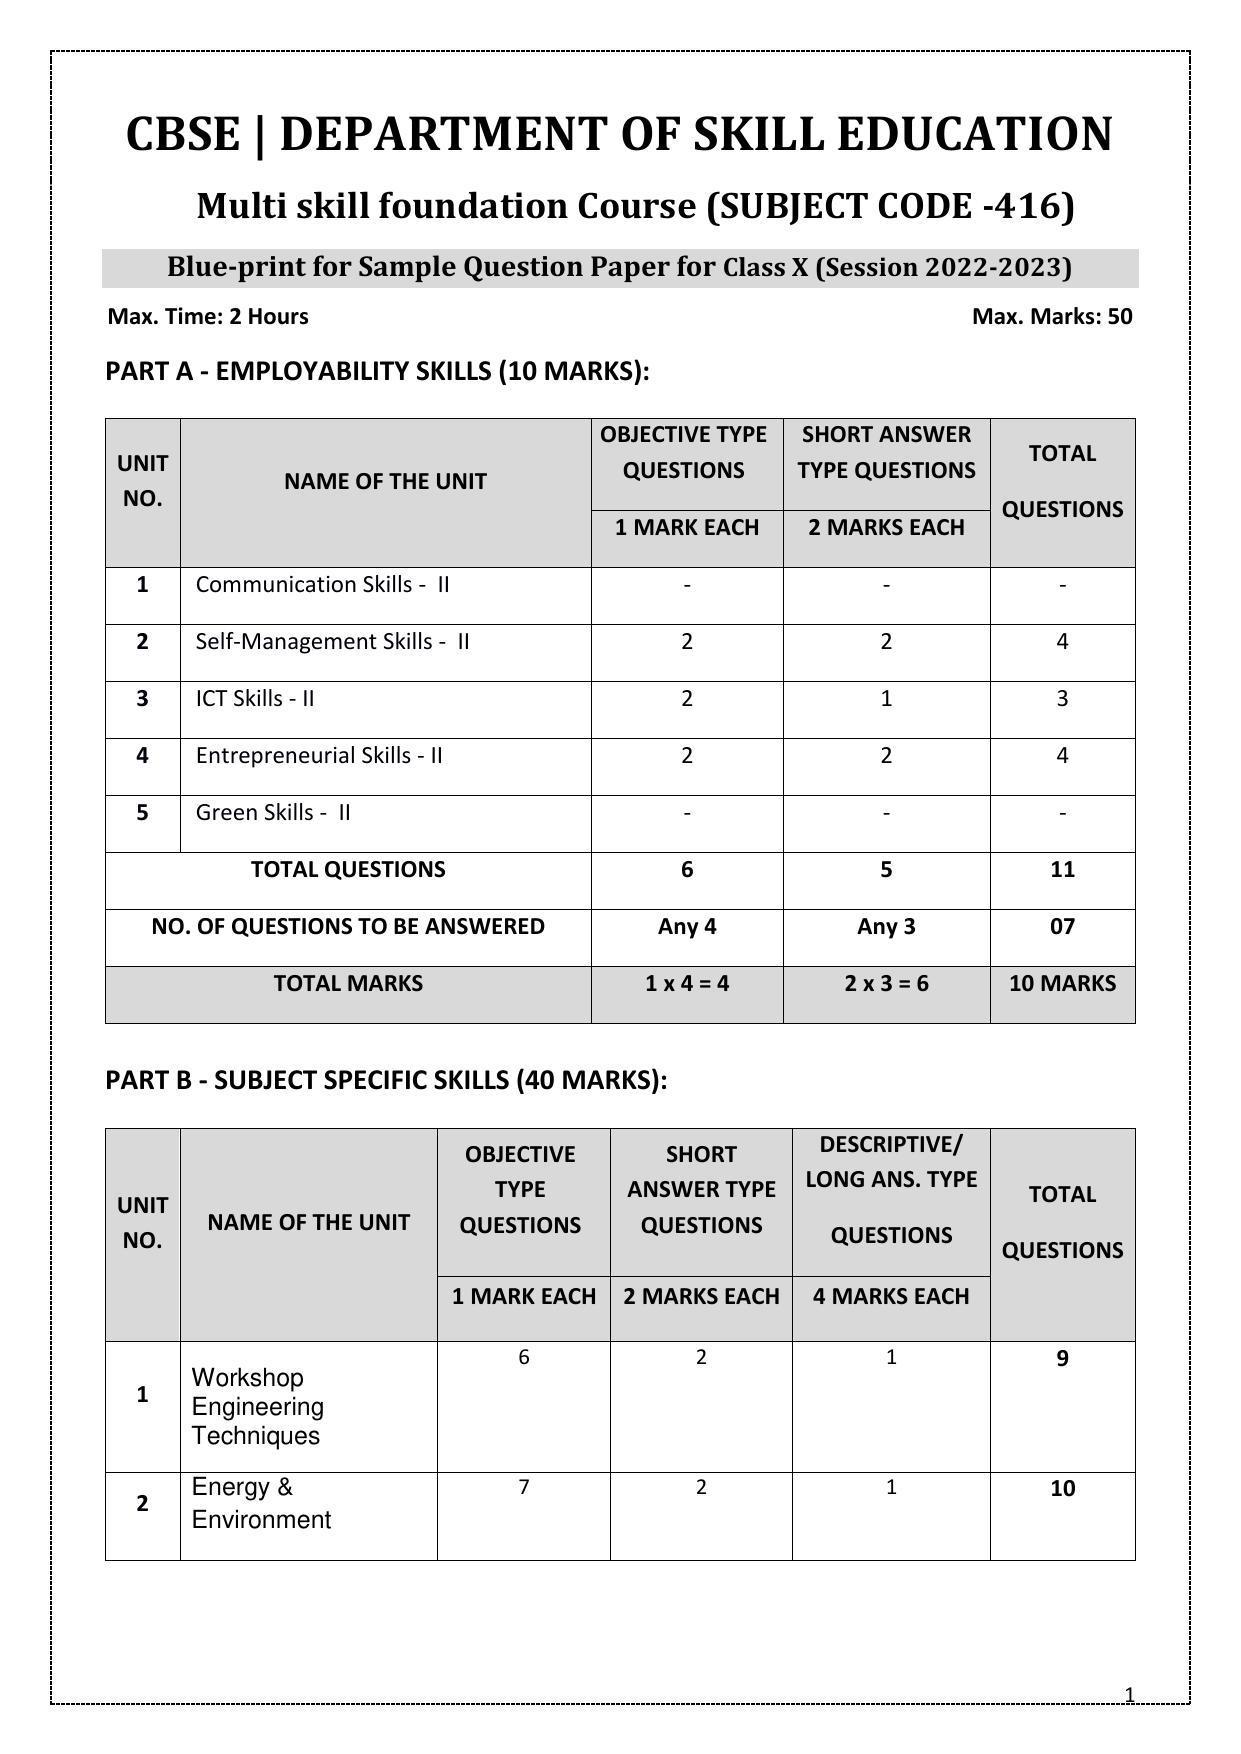 CBSE Class 10 (Skill Education) Multi Skill Foundation COURSE Sample Papers 2023 - Page 1